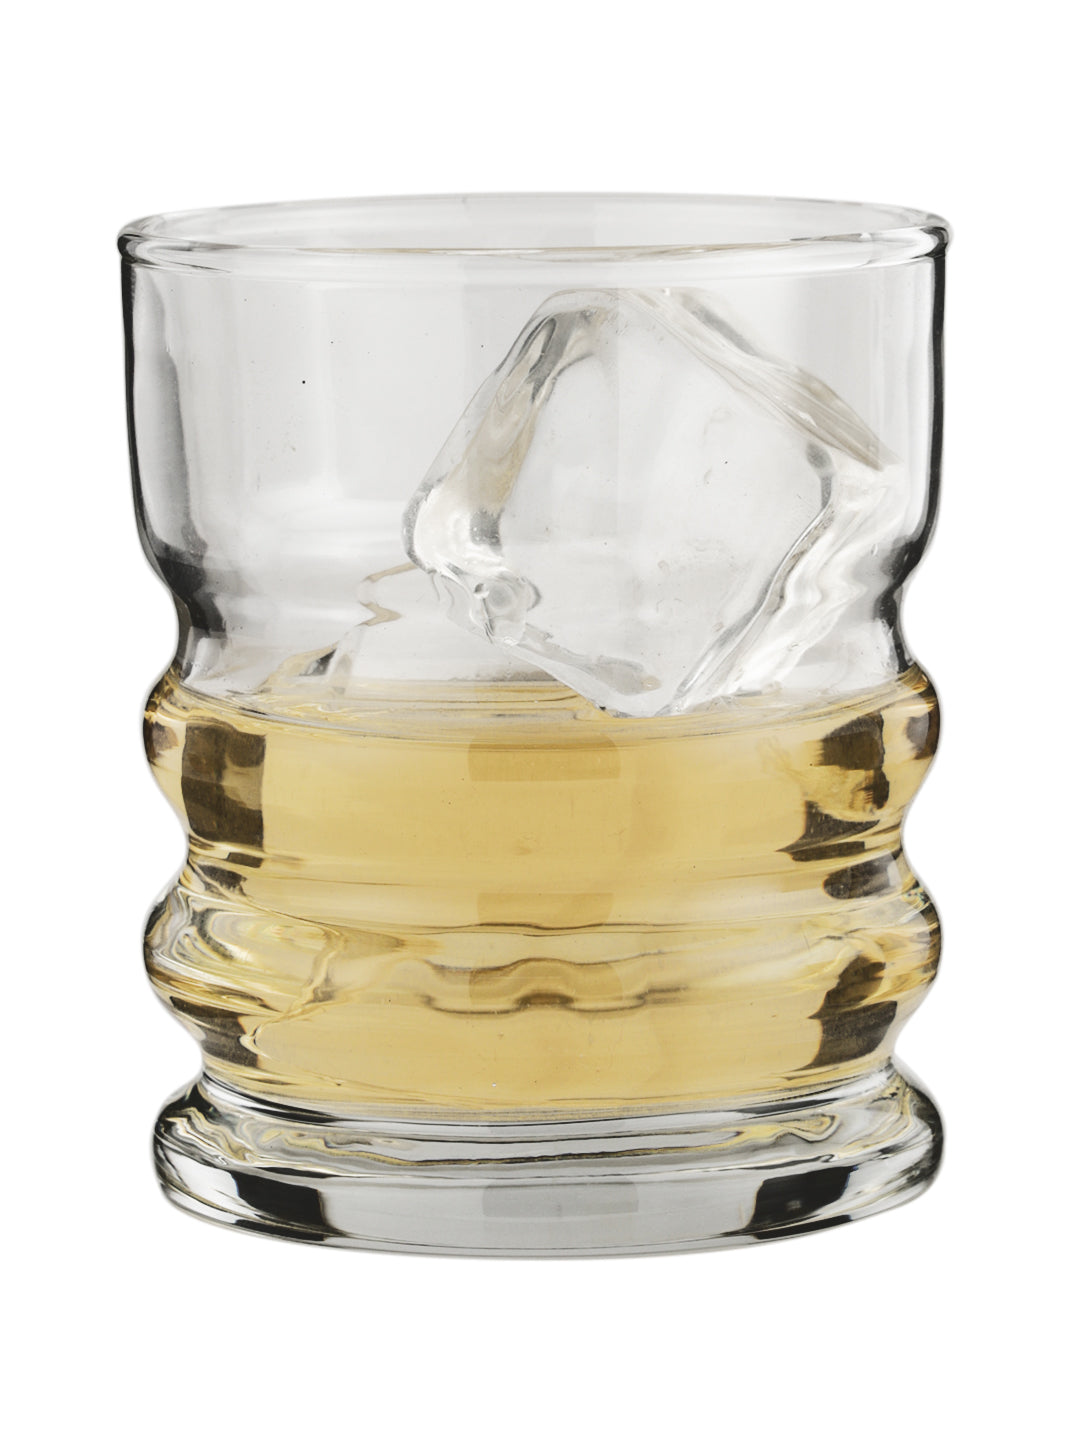 RINGS OF POWER WHISKEY GLASS - CRAFTED IN EUROPE – SET OF 6